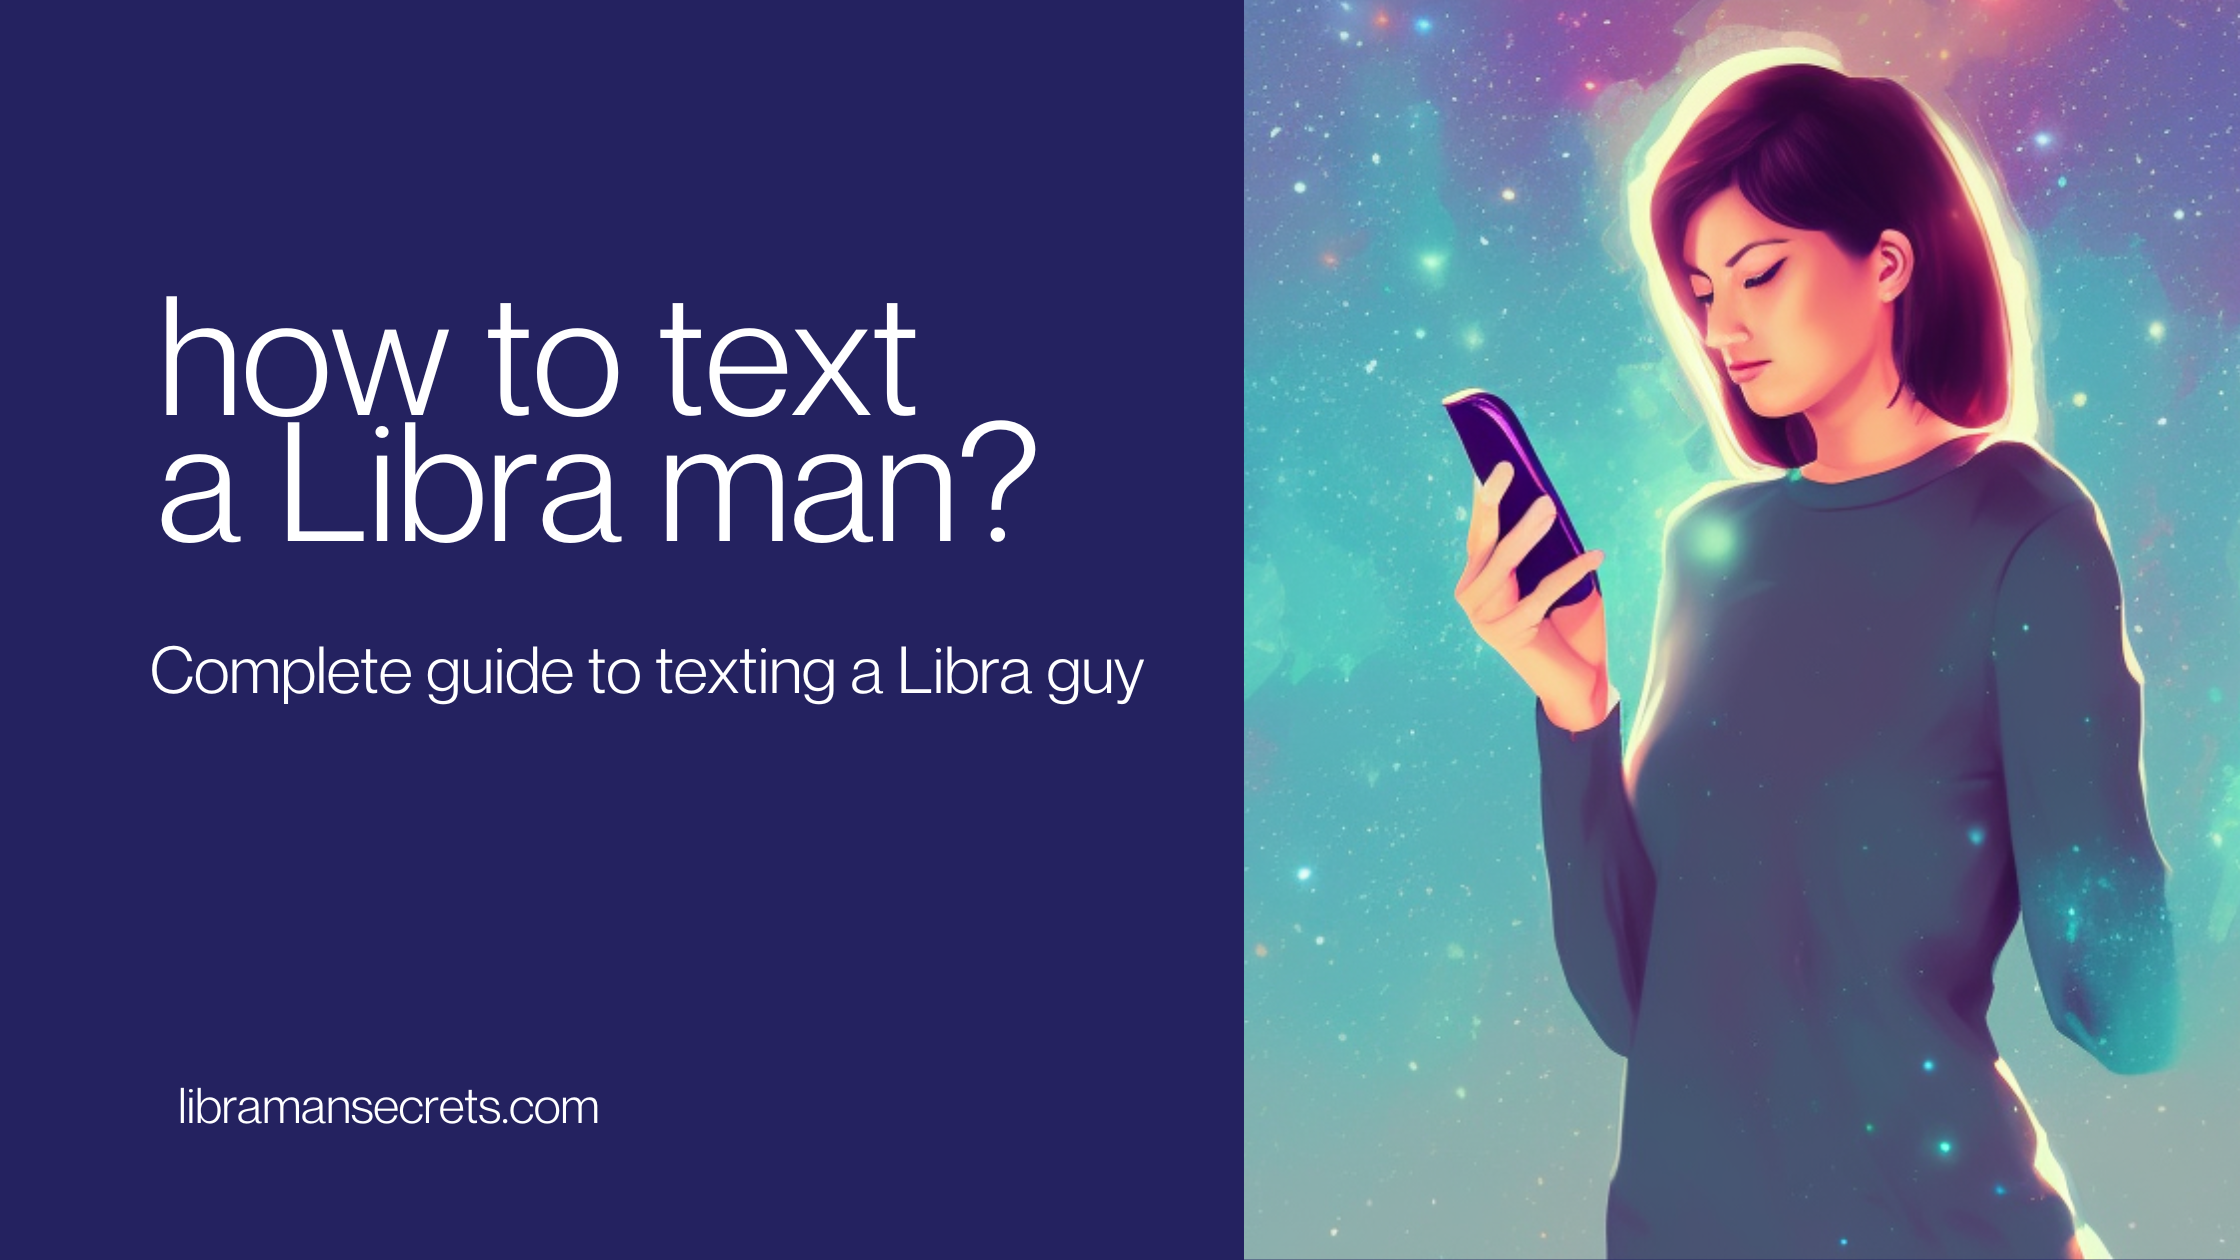 How To Text A Libra Man – A Complete Guide To Texting a Libra Man